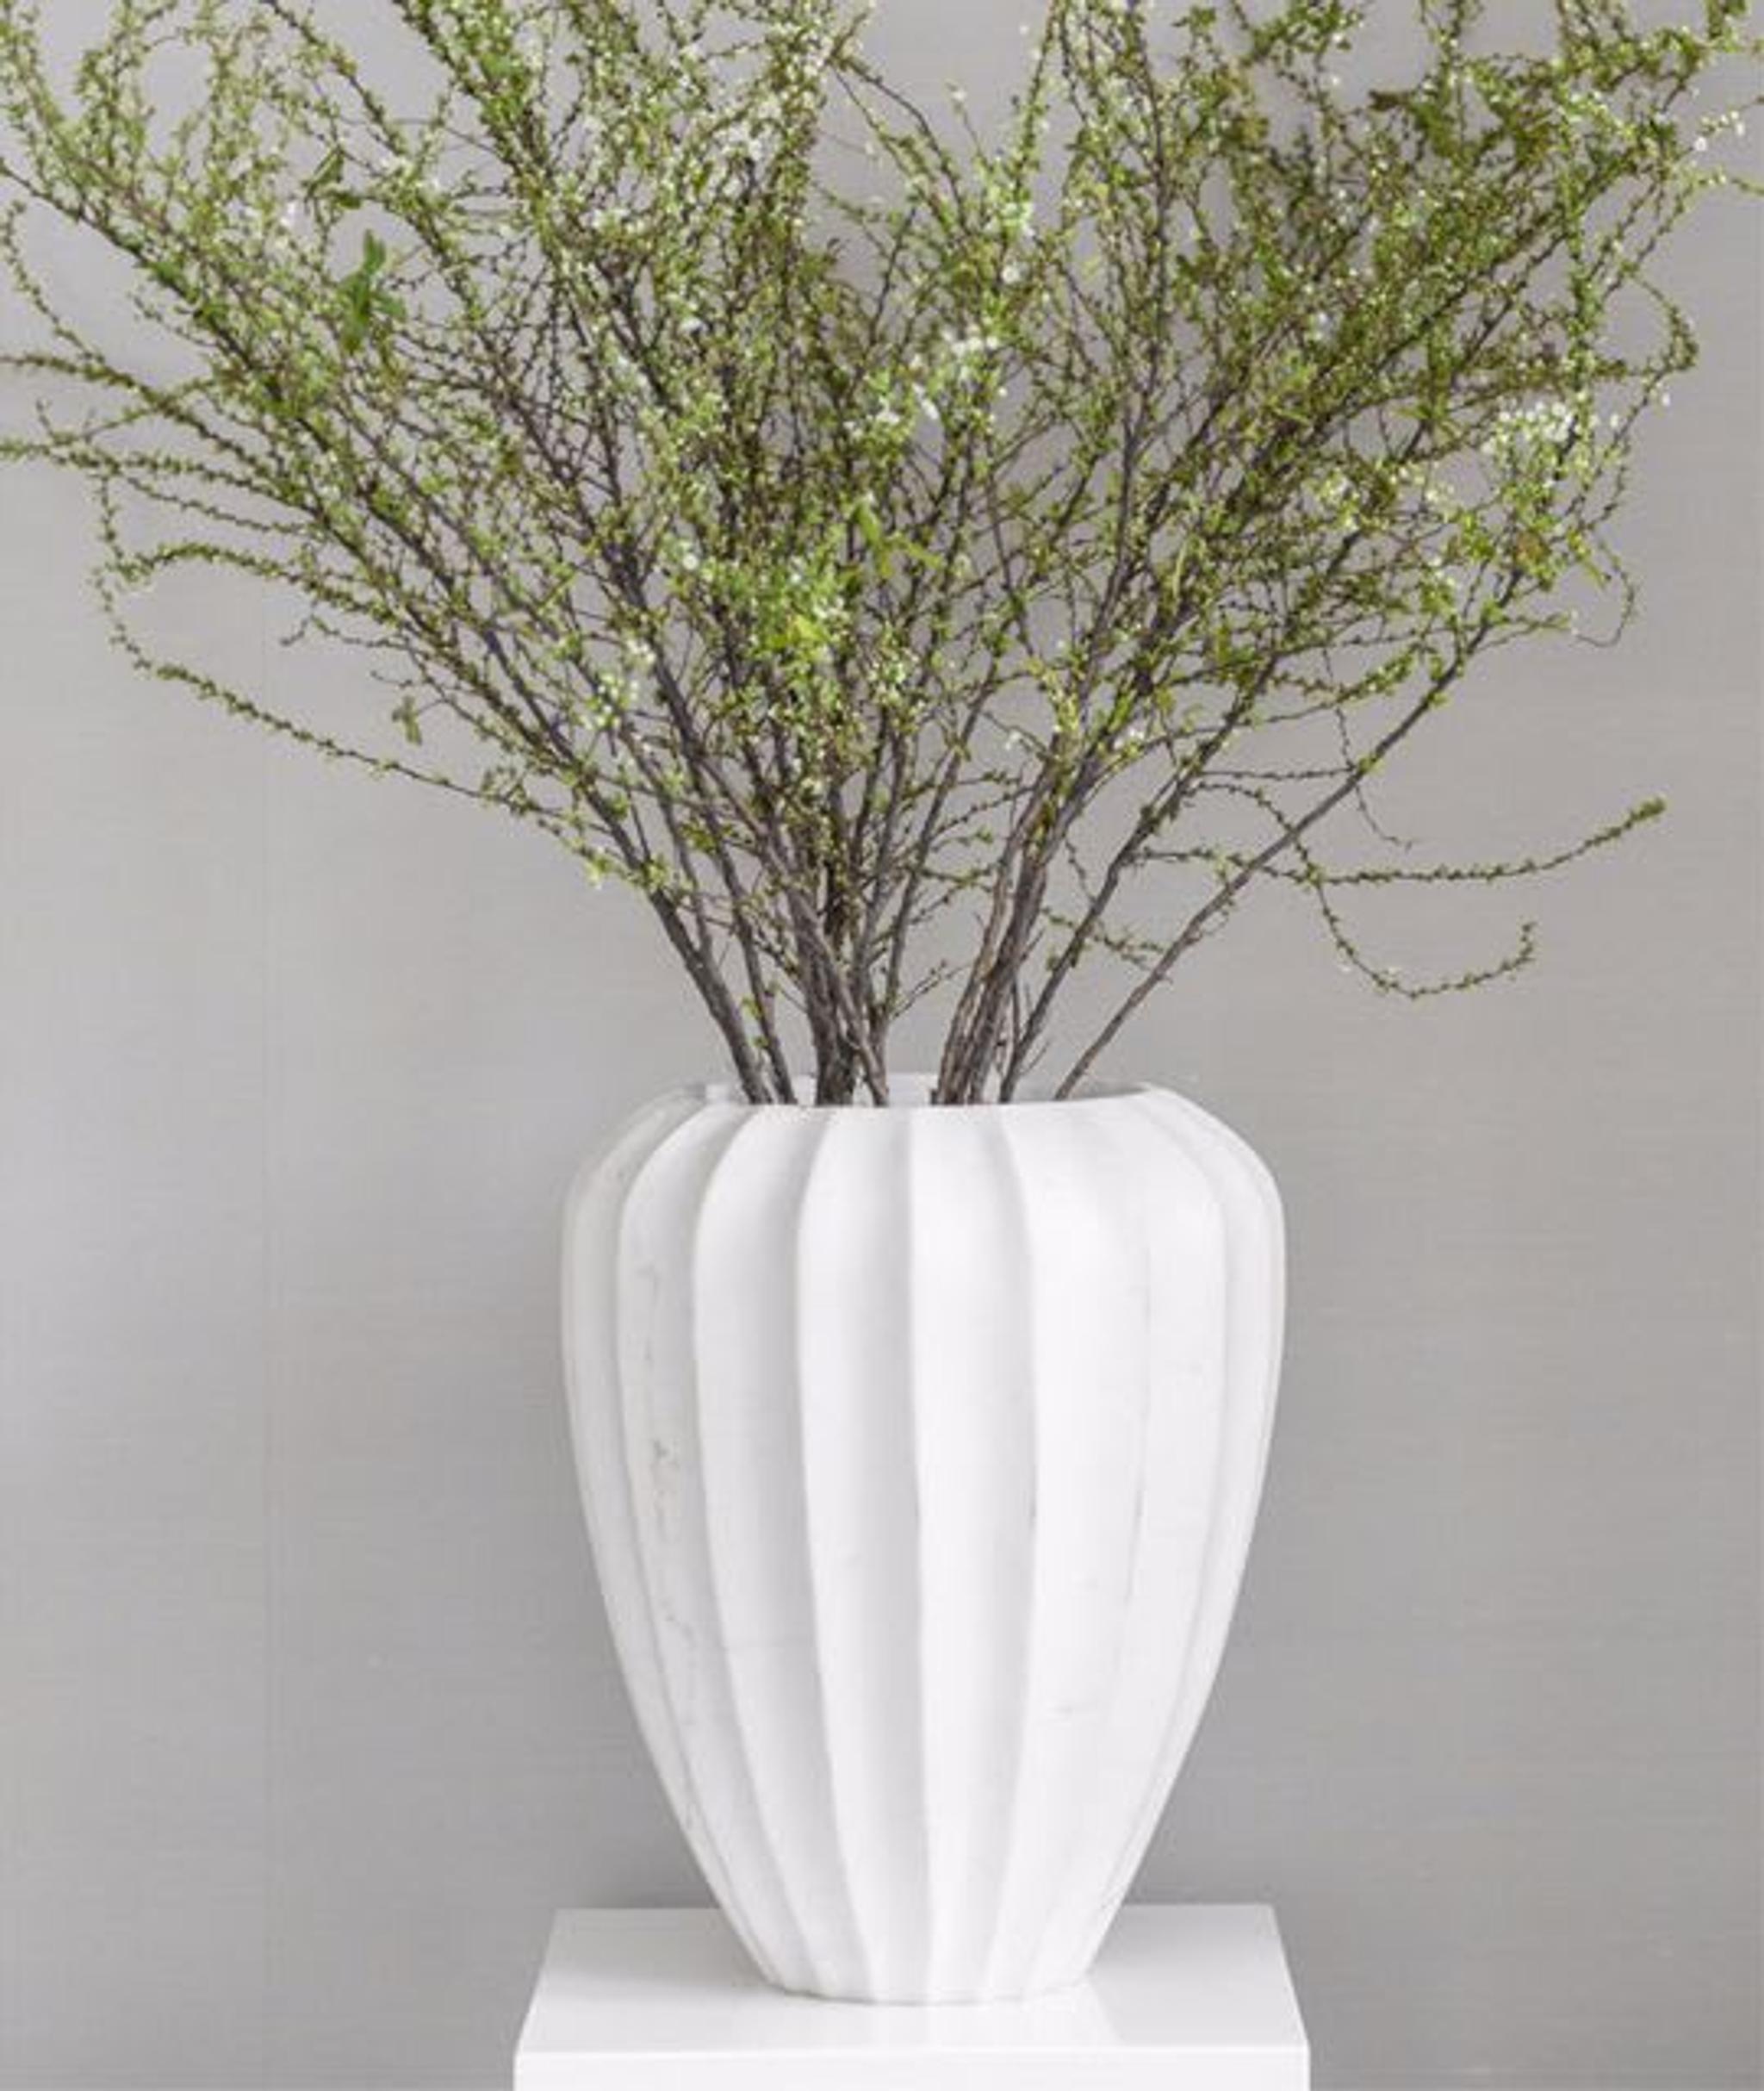 Refined décor details - a ceramic vase with long seasonal green branches adds a touch of green